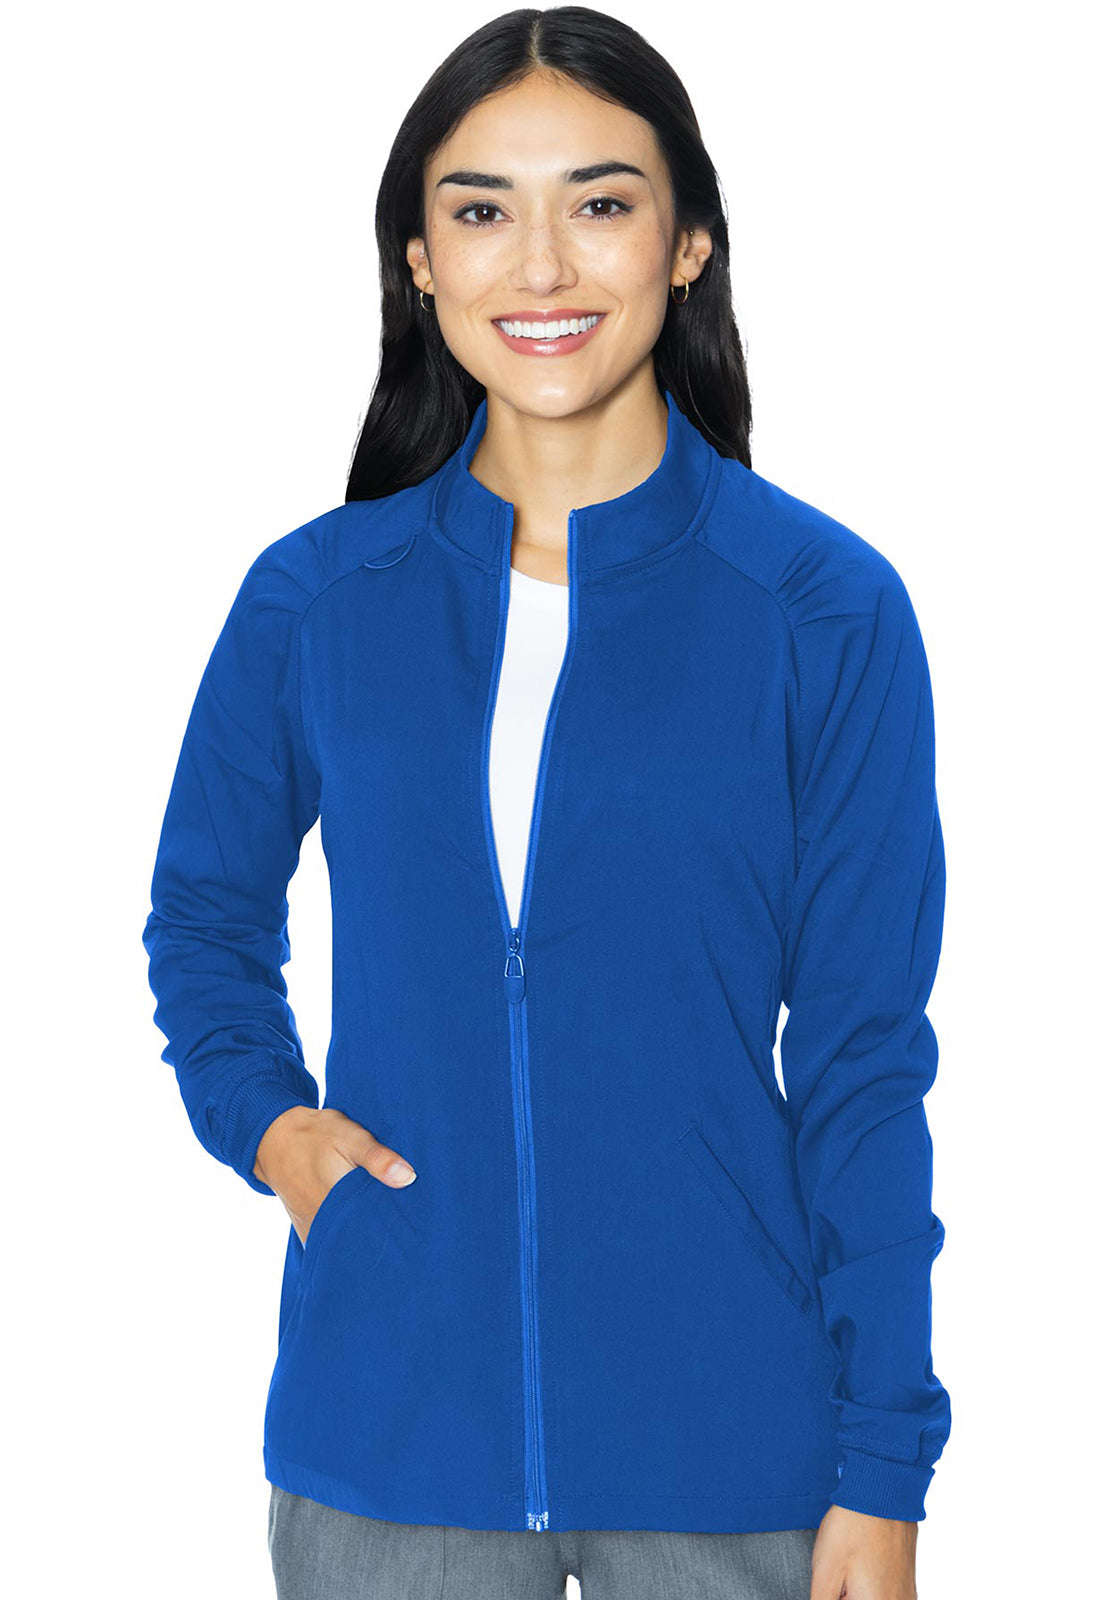 Med Couture Touch Raglan Warm-Up Jacket